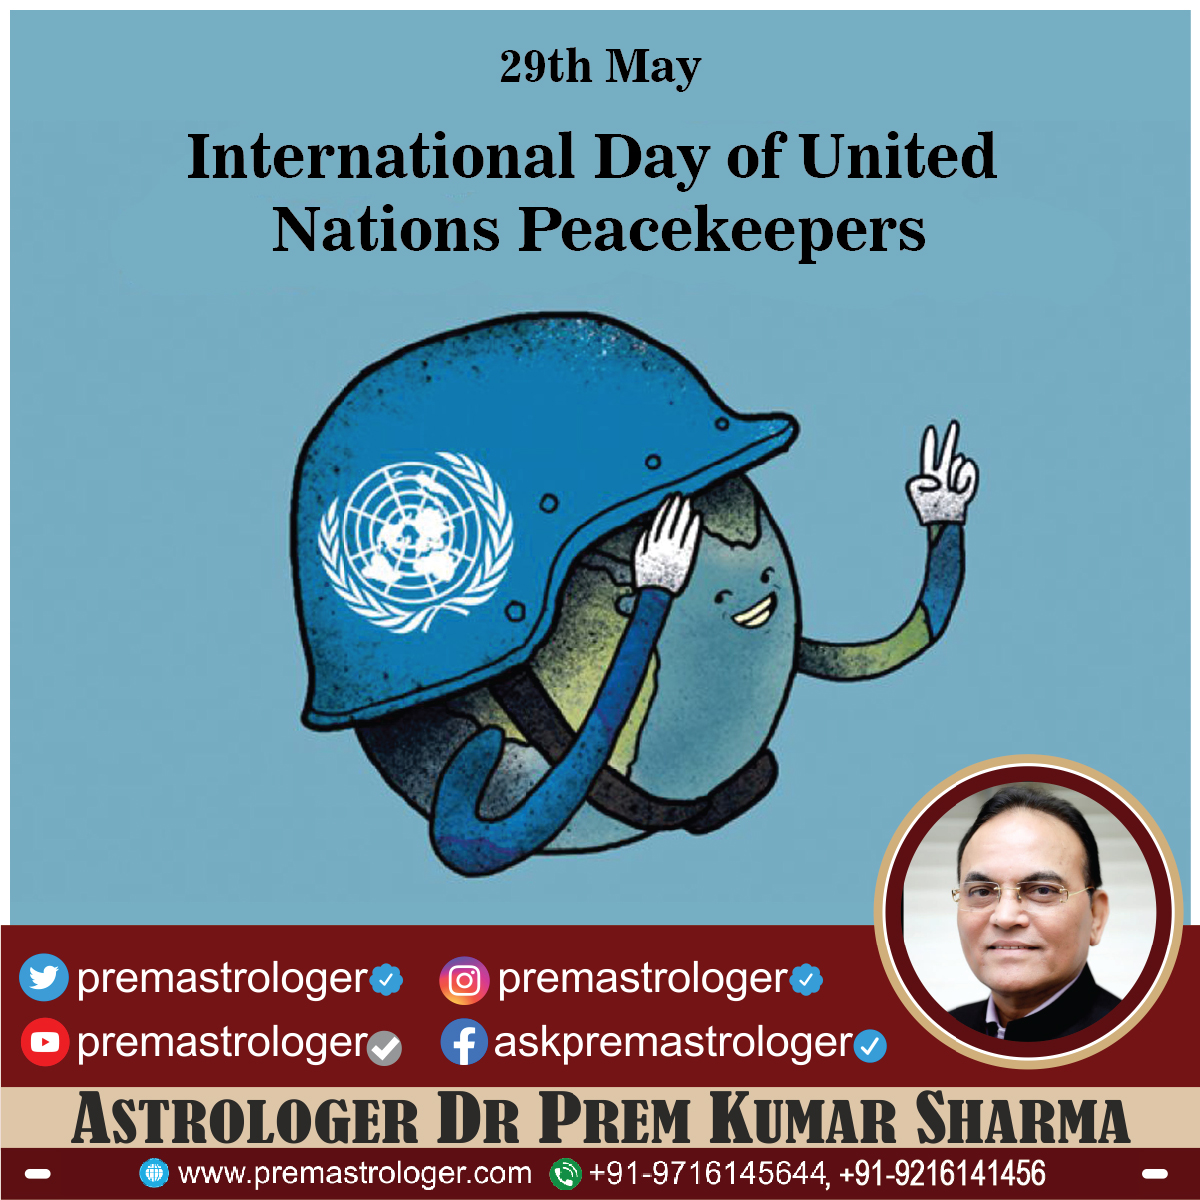 On Intl. Day of UN Peacekeepers, we salute the brave men & women who risk their lives to promote peace around the world. Their commitment & sacrifice inspire us all.Let's express gratitude to these peacekeepers & reaffirm our support for global peace & security.

#PeacekeepersDay